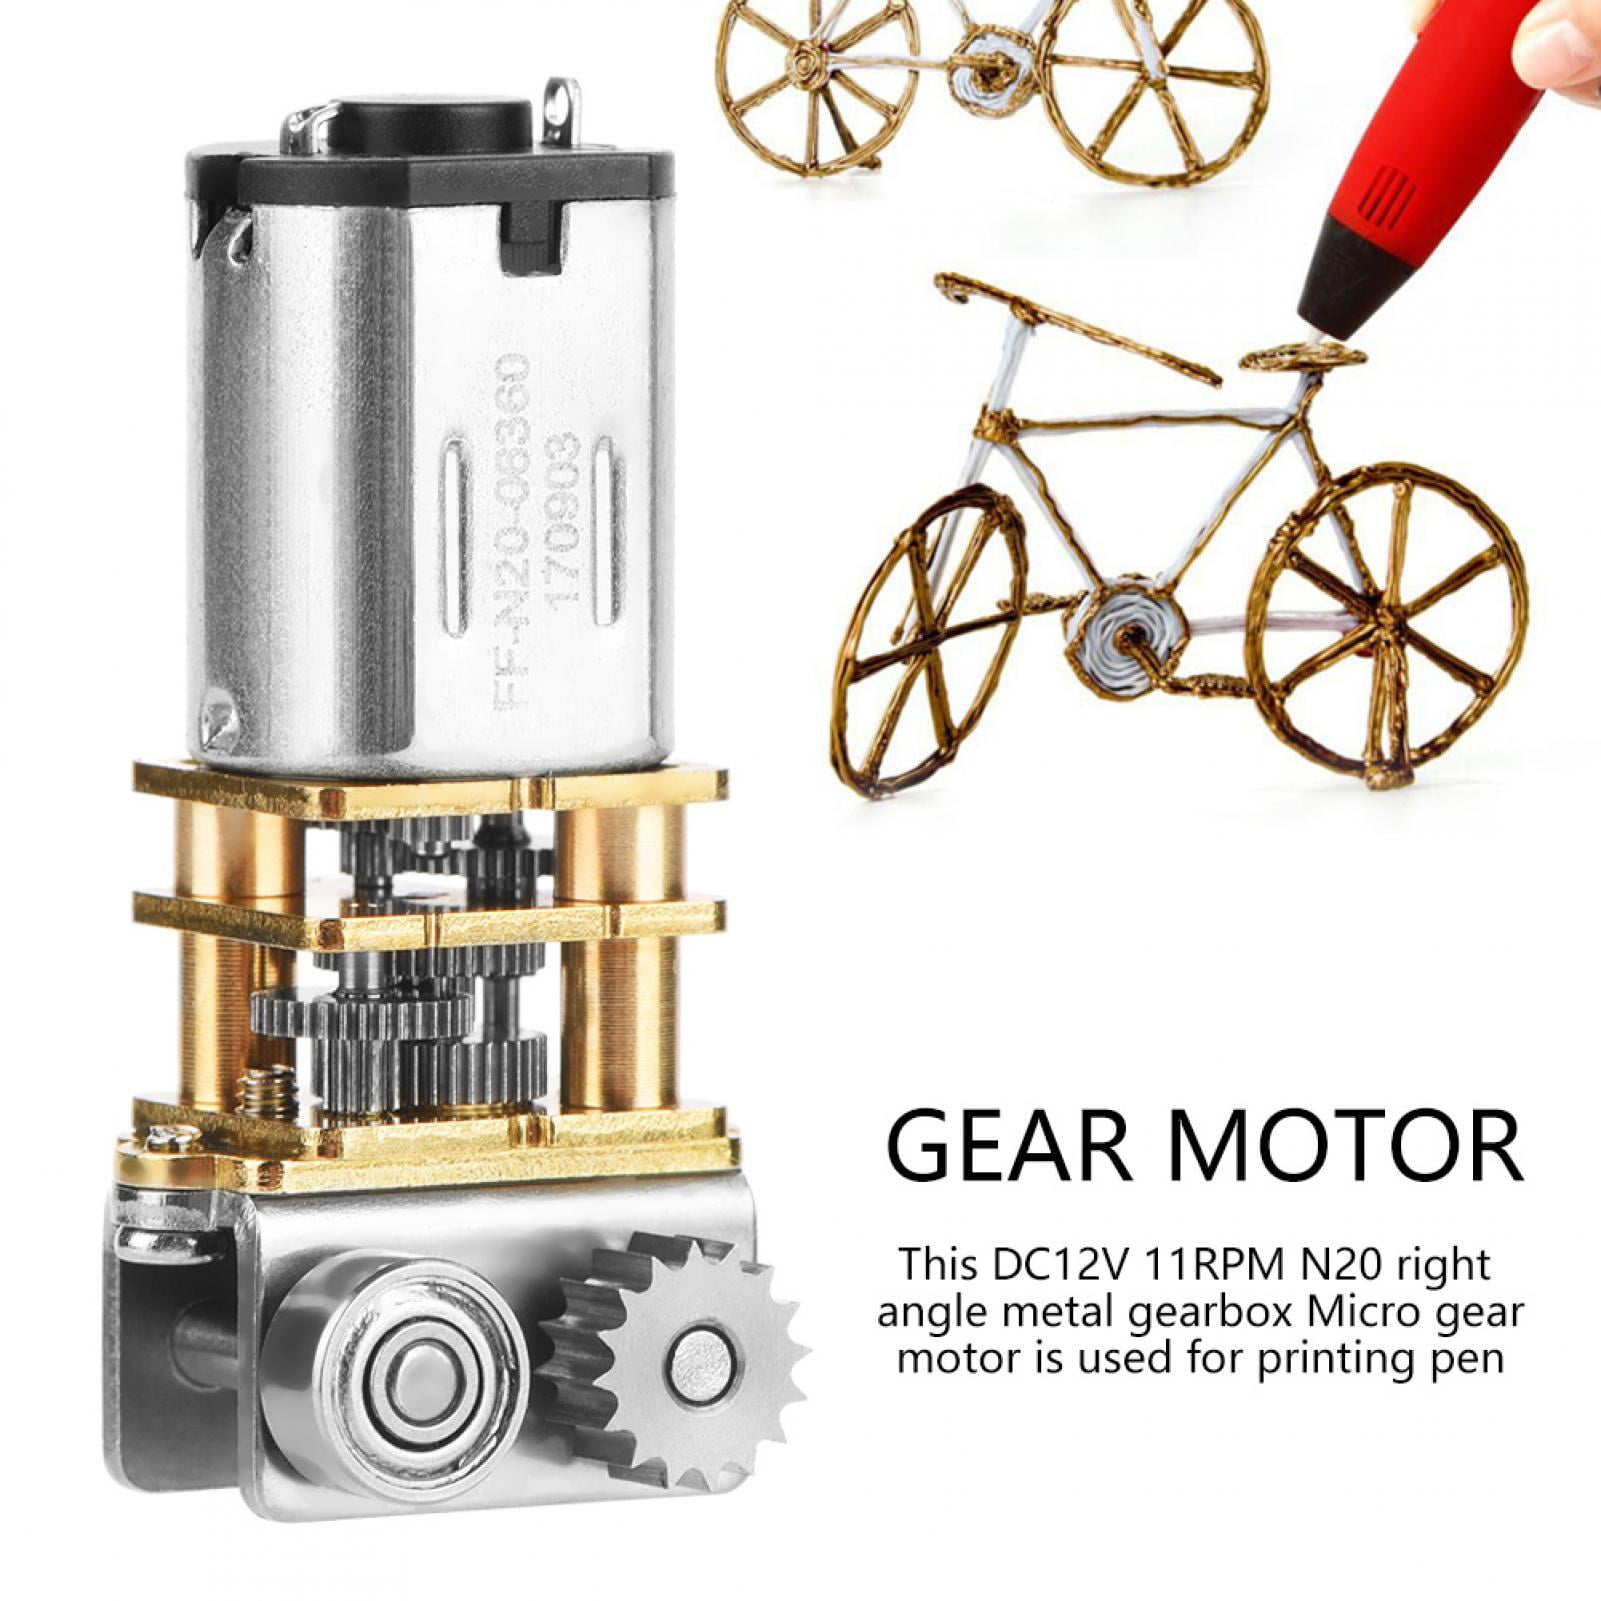 12V 11RPM N20 Right Angle Metal Gearbox Micro Gear Motor for 3D Printing Pen MS 